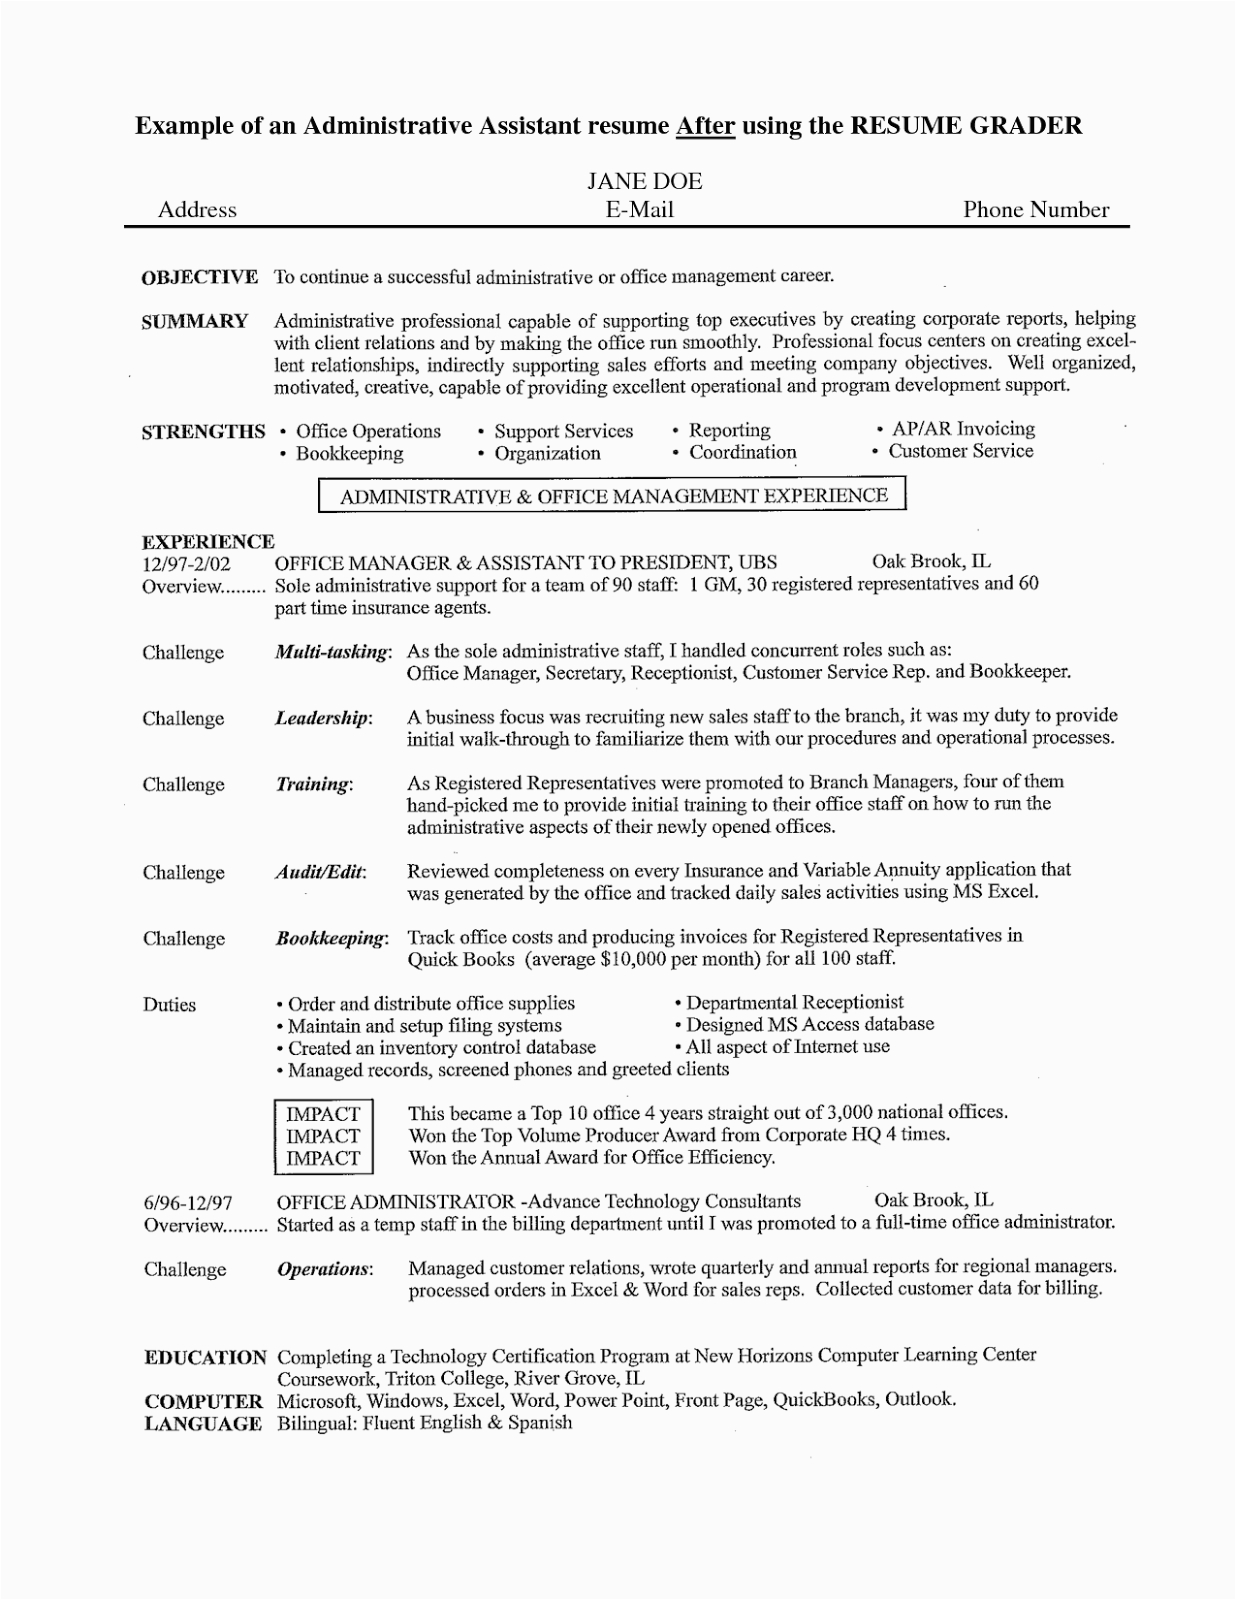 sample objective on resume for administrative assistant